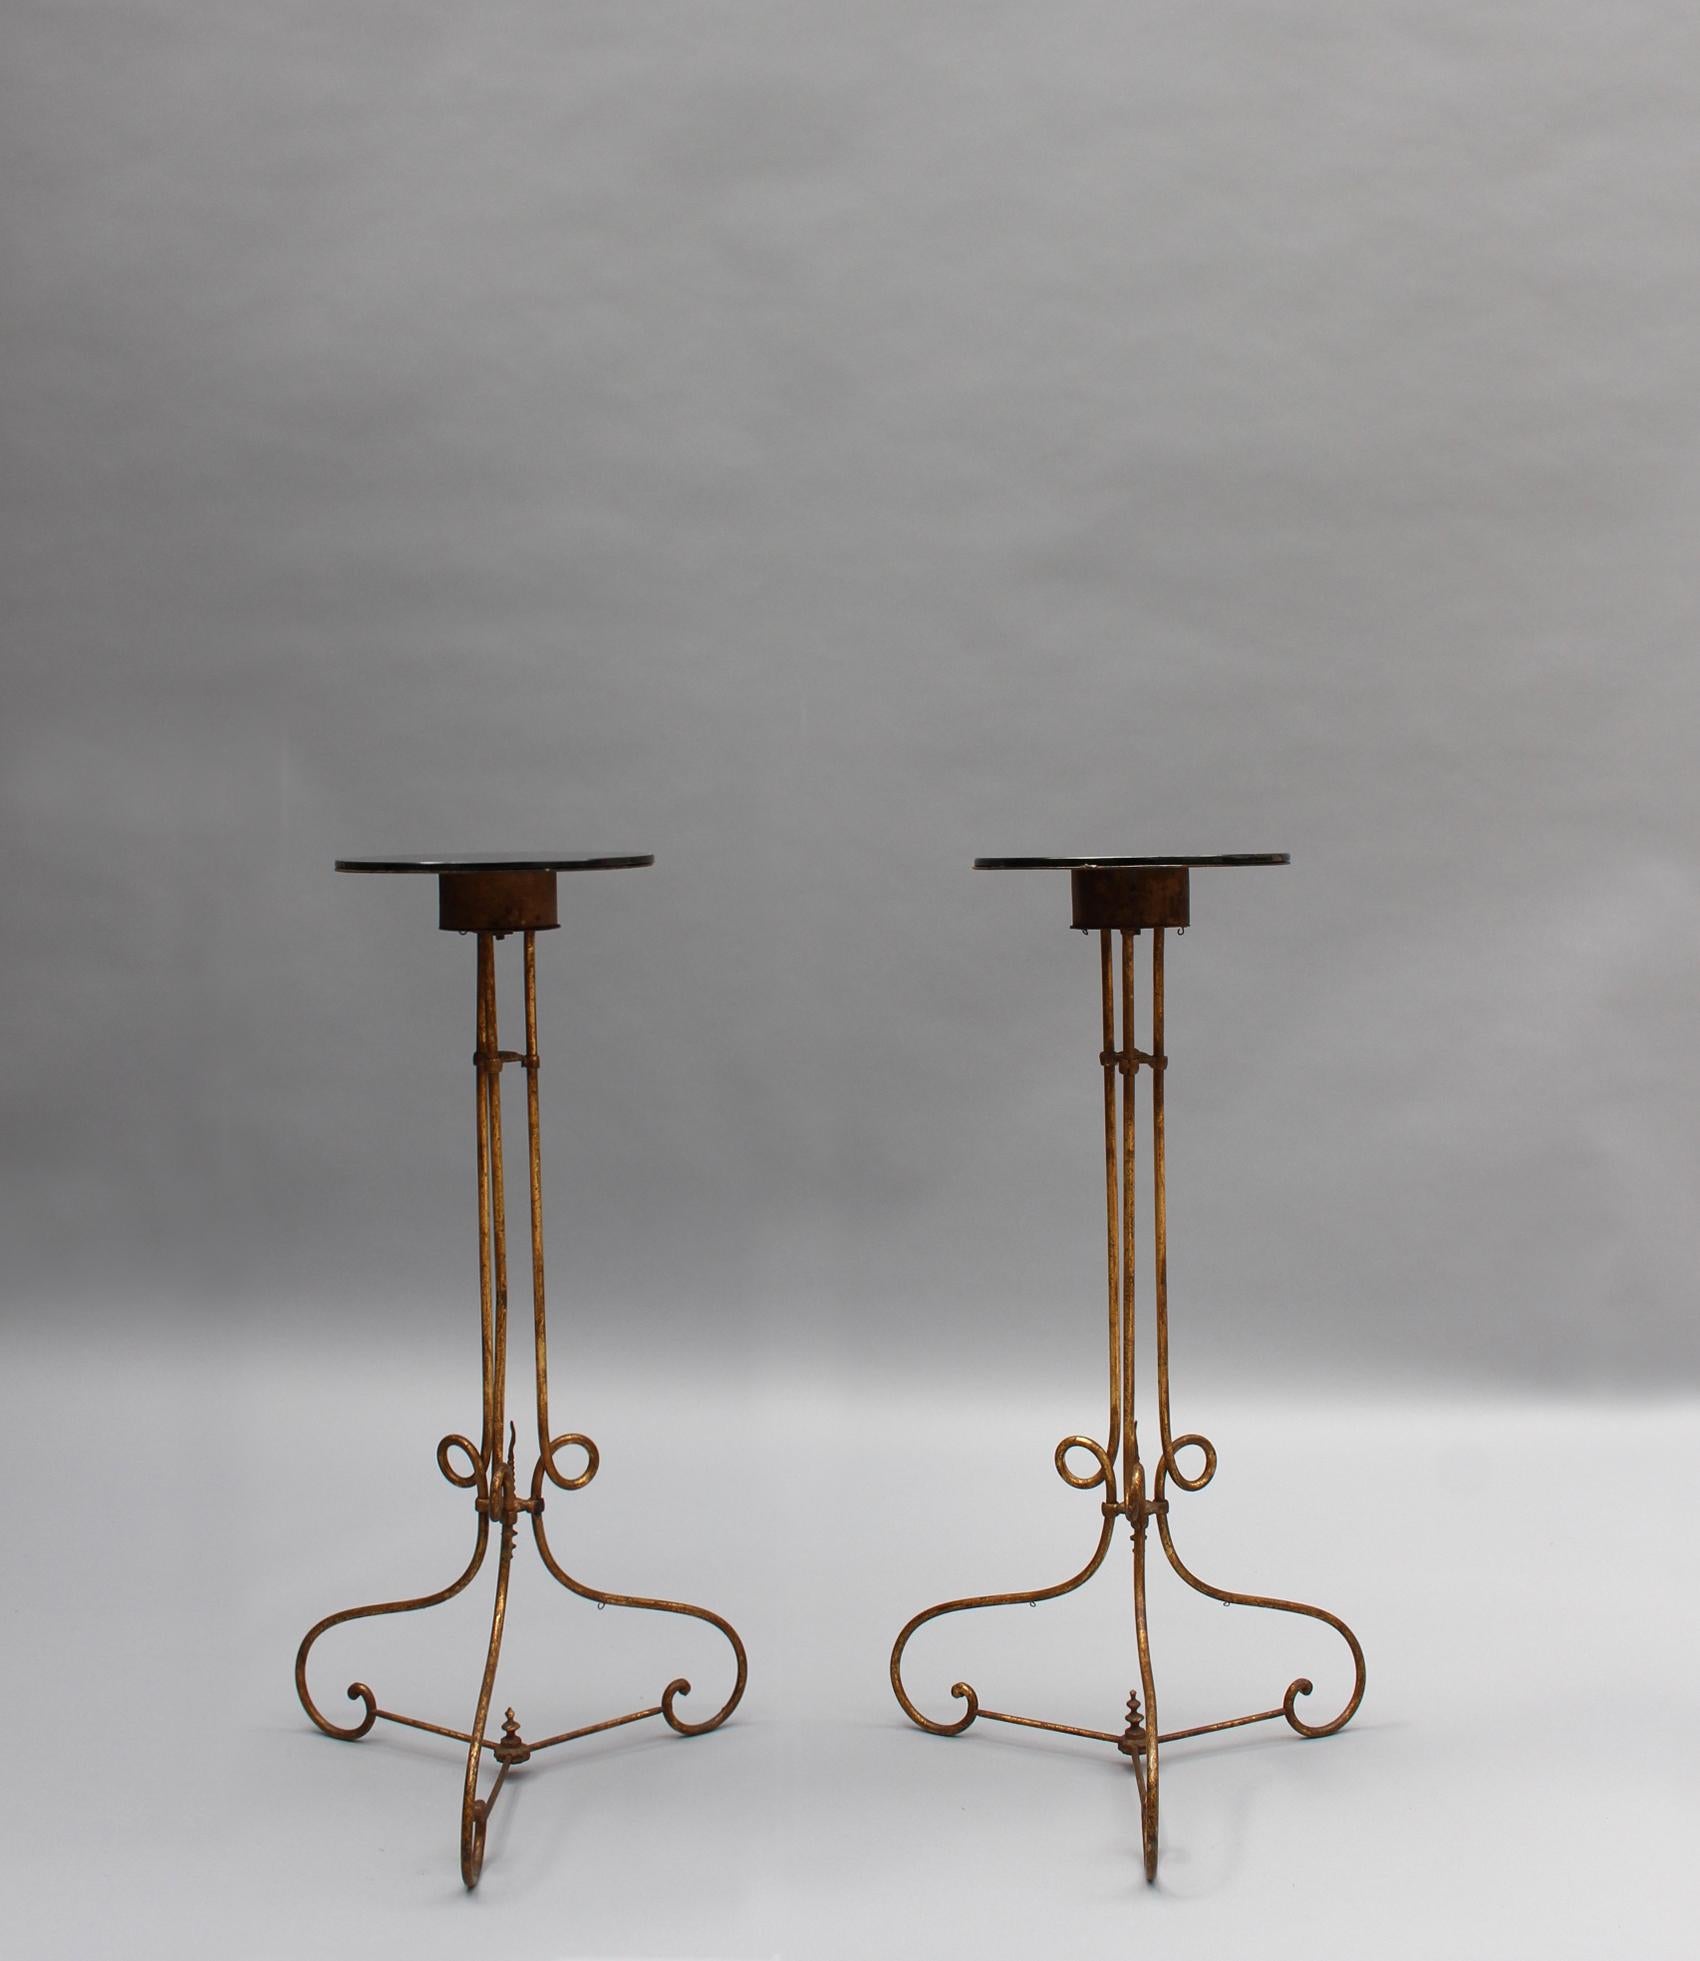 A pair of fine and elegant French Art Deco pedestal stands with a gilded wrought iron base that supports a black opaline glass top (which diameter is 10 1/4